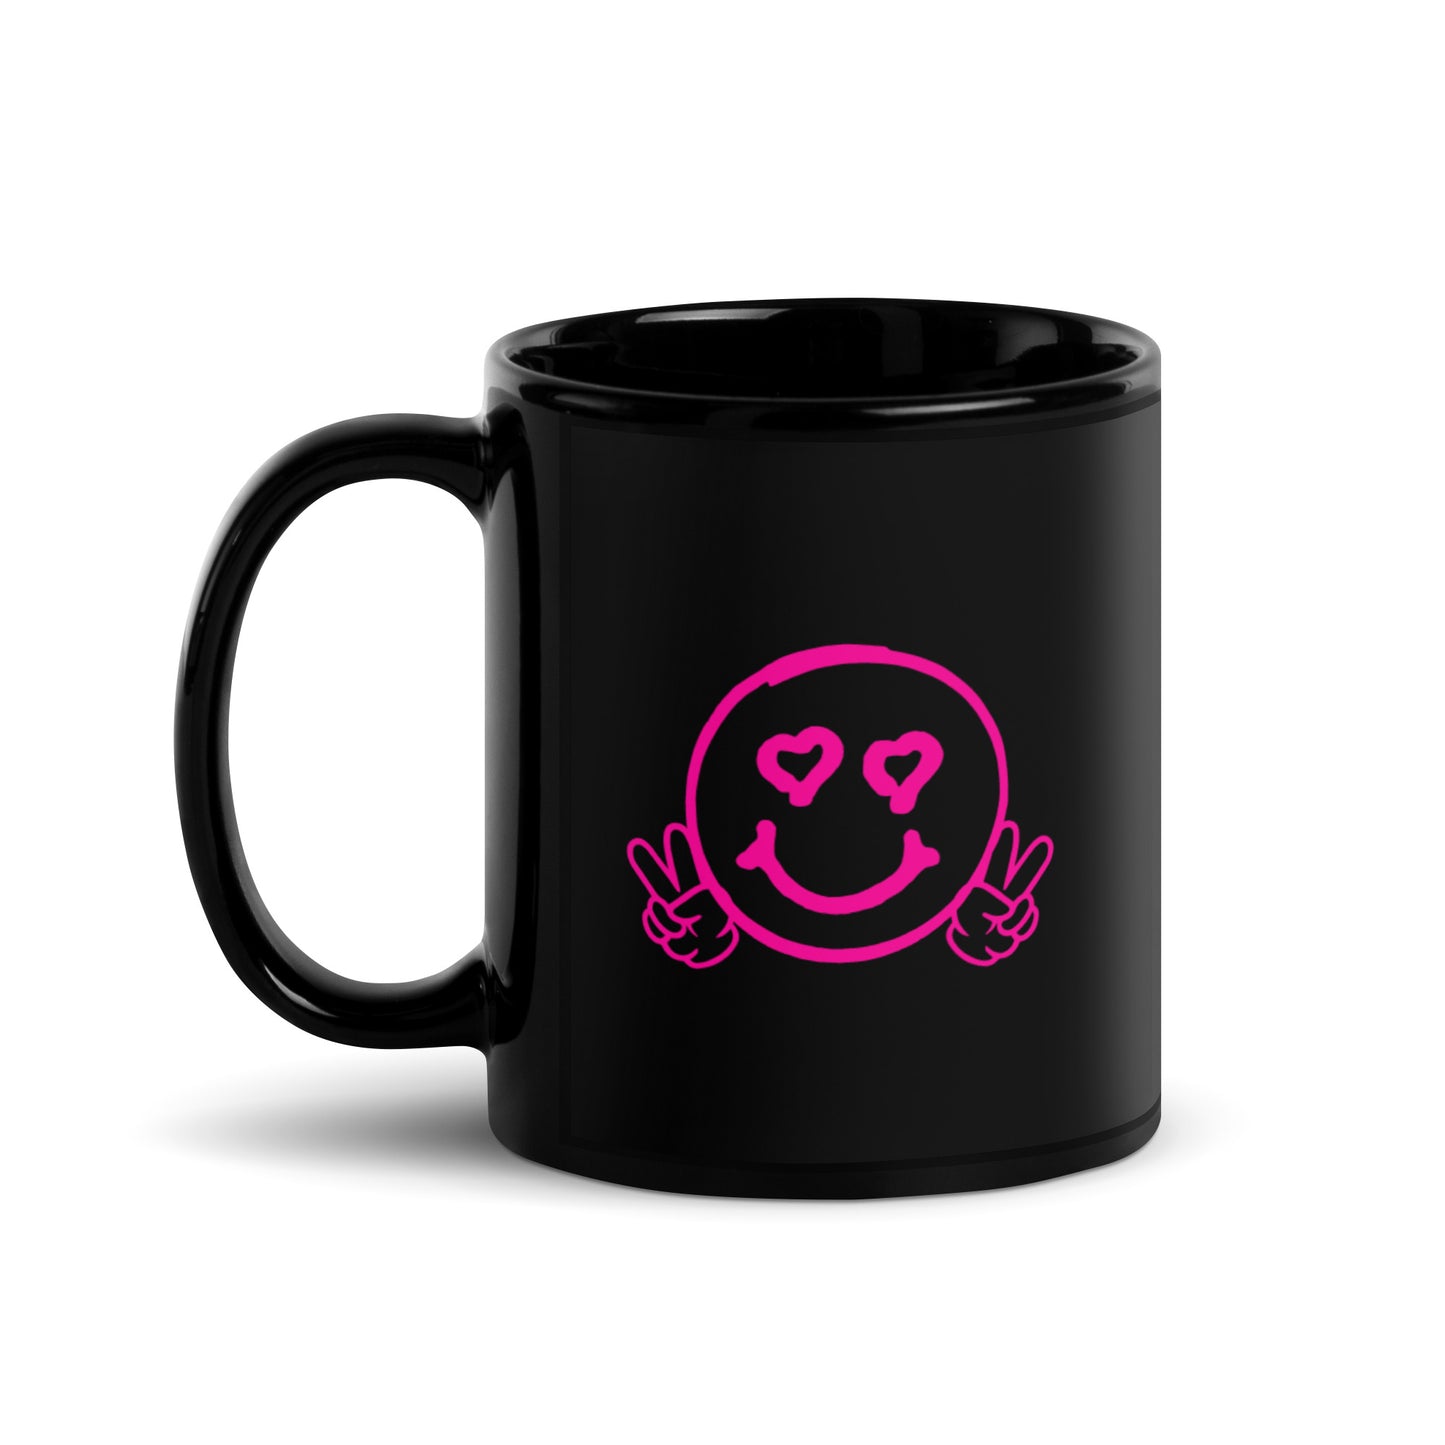 Hot Pink Smiley Face and Have A Good Day, Black Glossy Mug